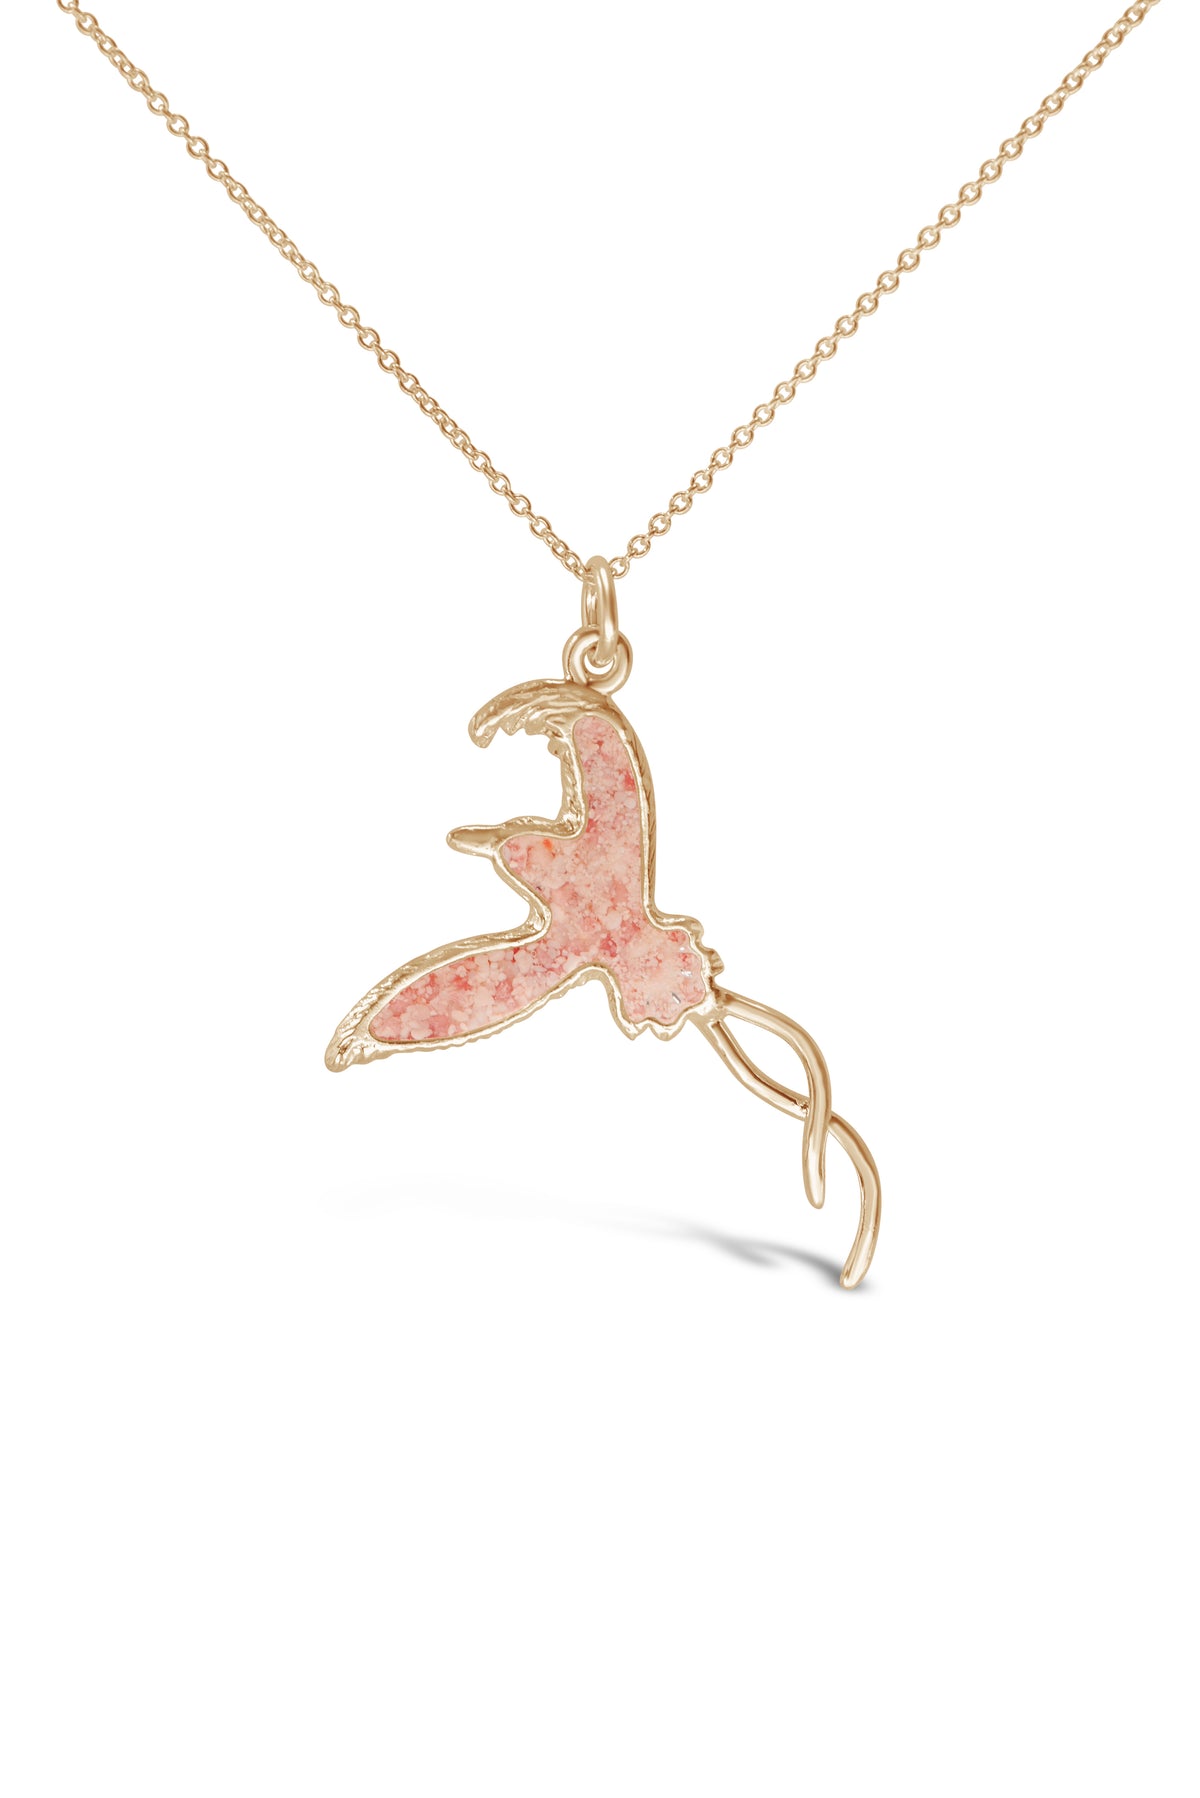 Longtail ~ Pendant in Gold